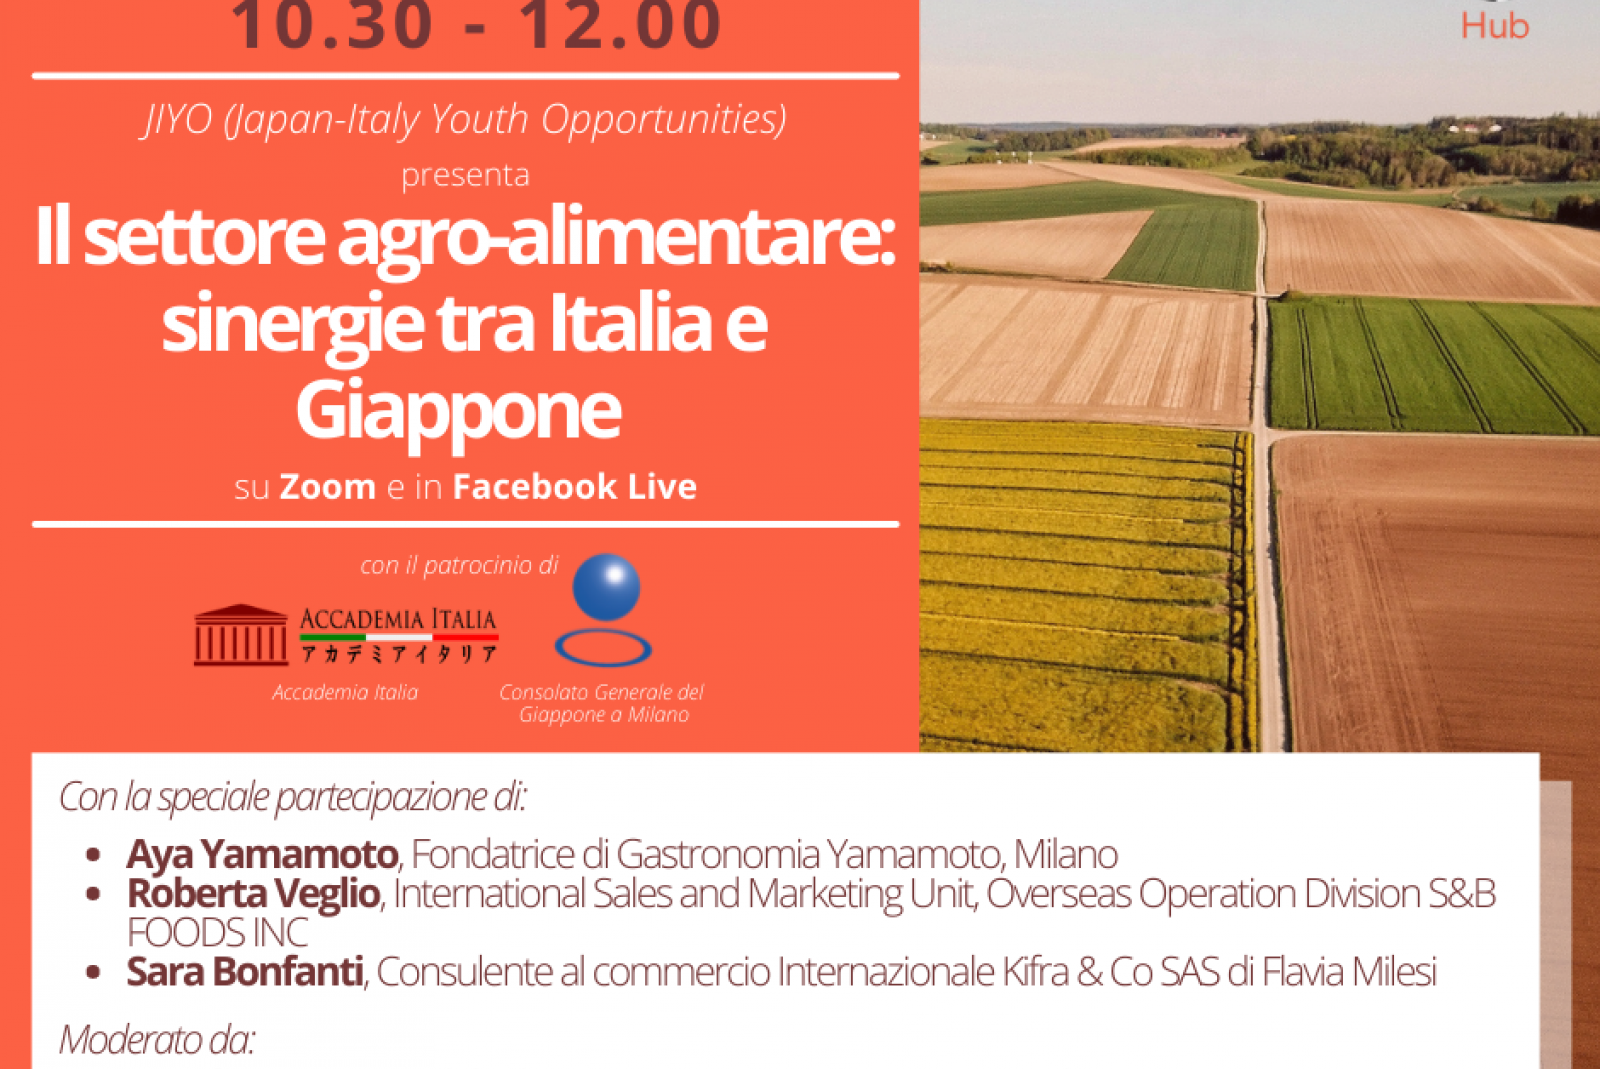 Il settore agro-alimentare: sinergie tra Italia e Giappone (The agri-food sector: synergies between Italy and Japan) – 18 settembre 2021, 10.30-12.00